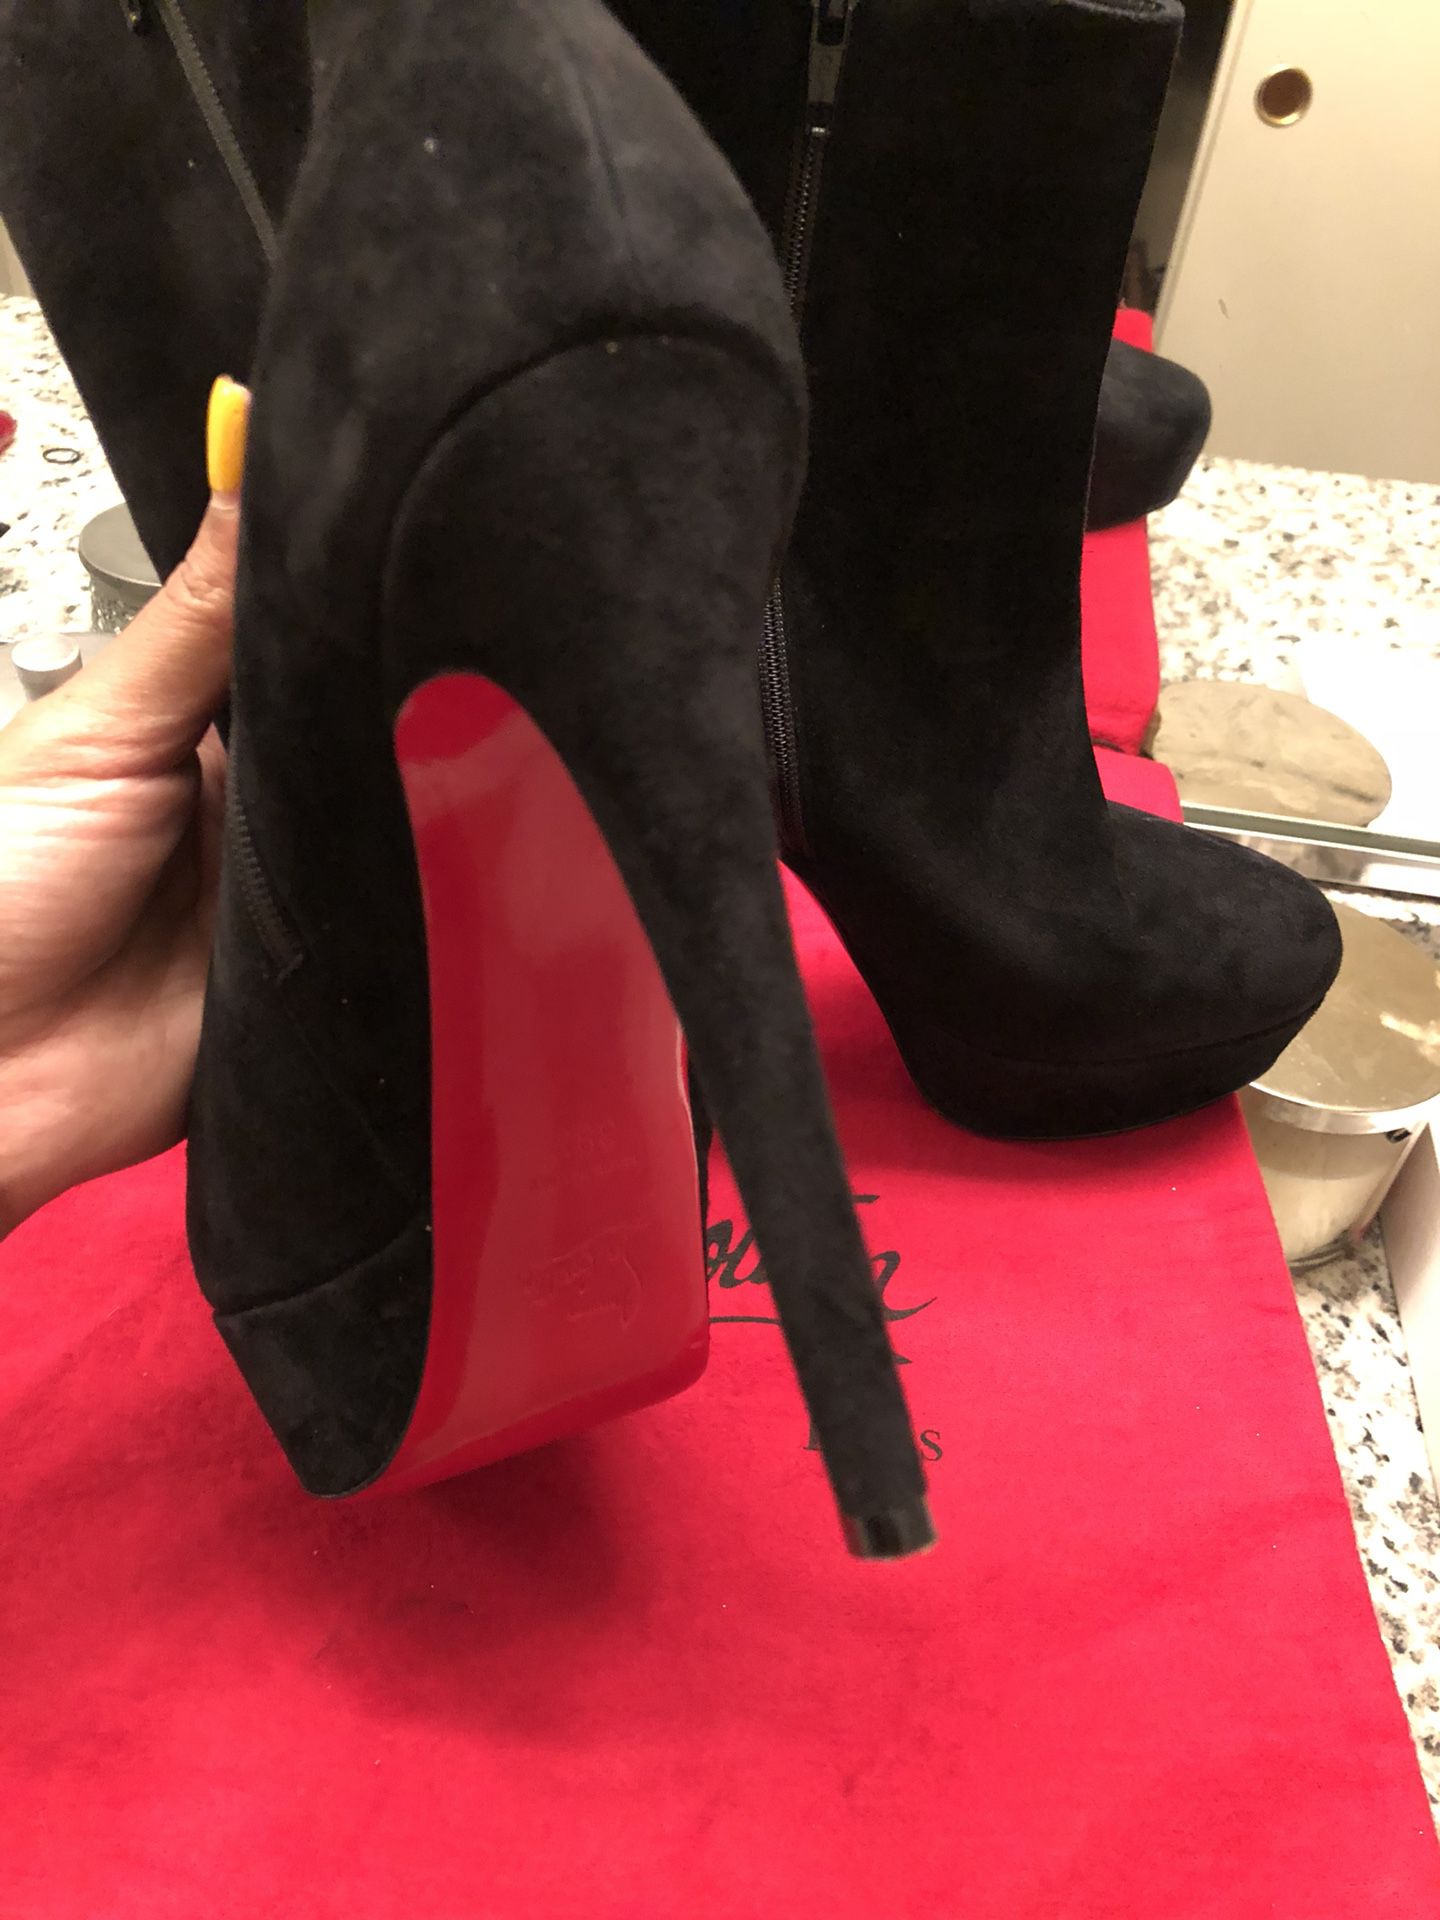 Christian Louboutin's - Bianca Booty 120 for Sale in Las Vegas, NV 